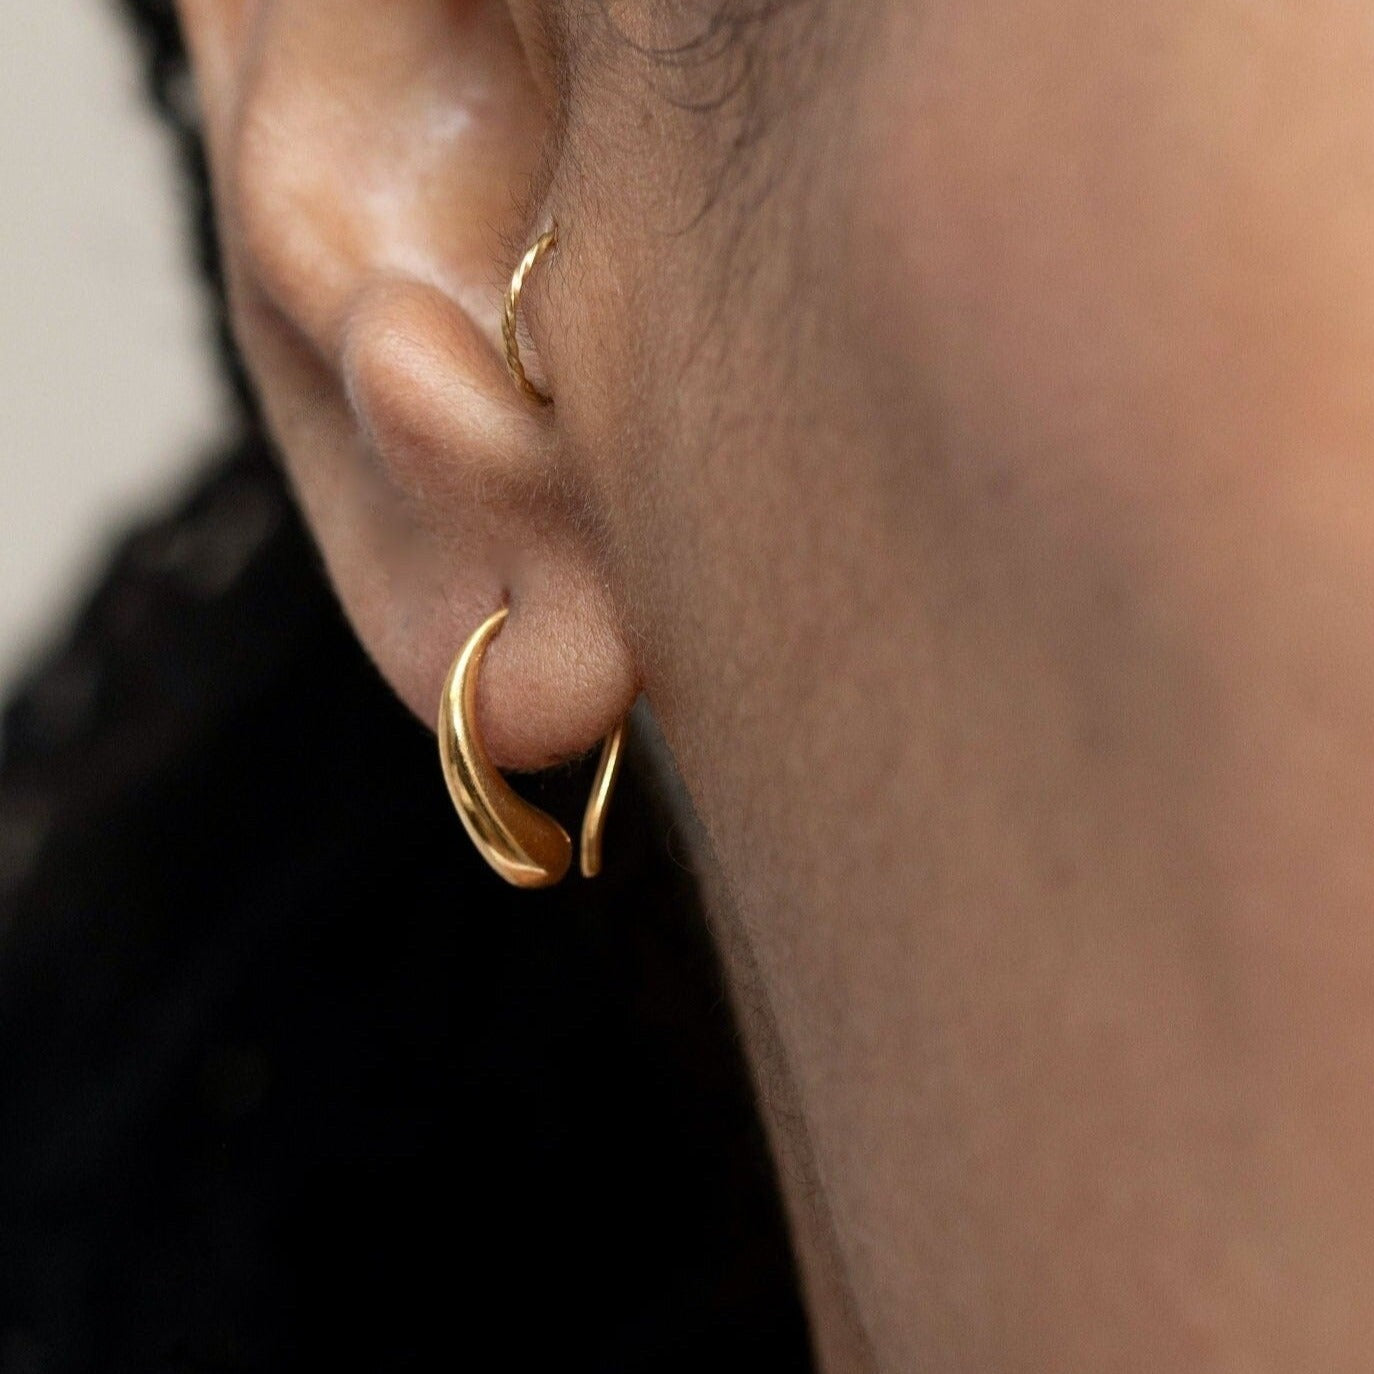 tiny raindrop earrings in gold.